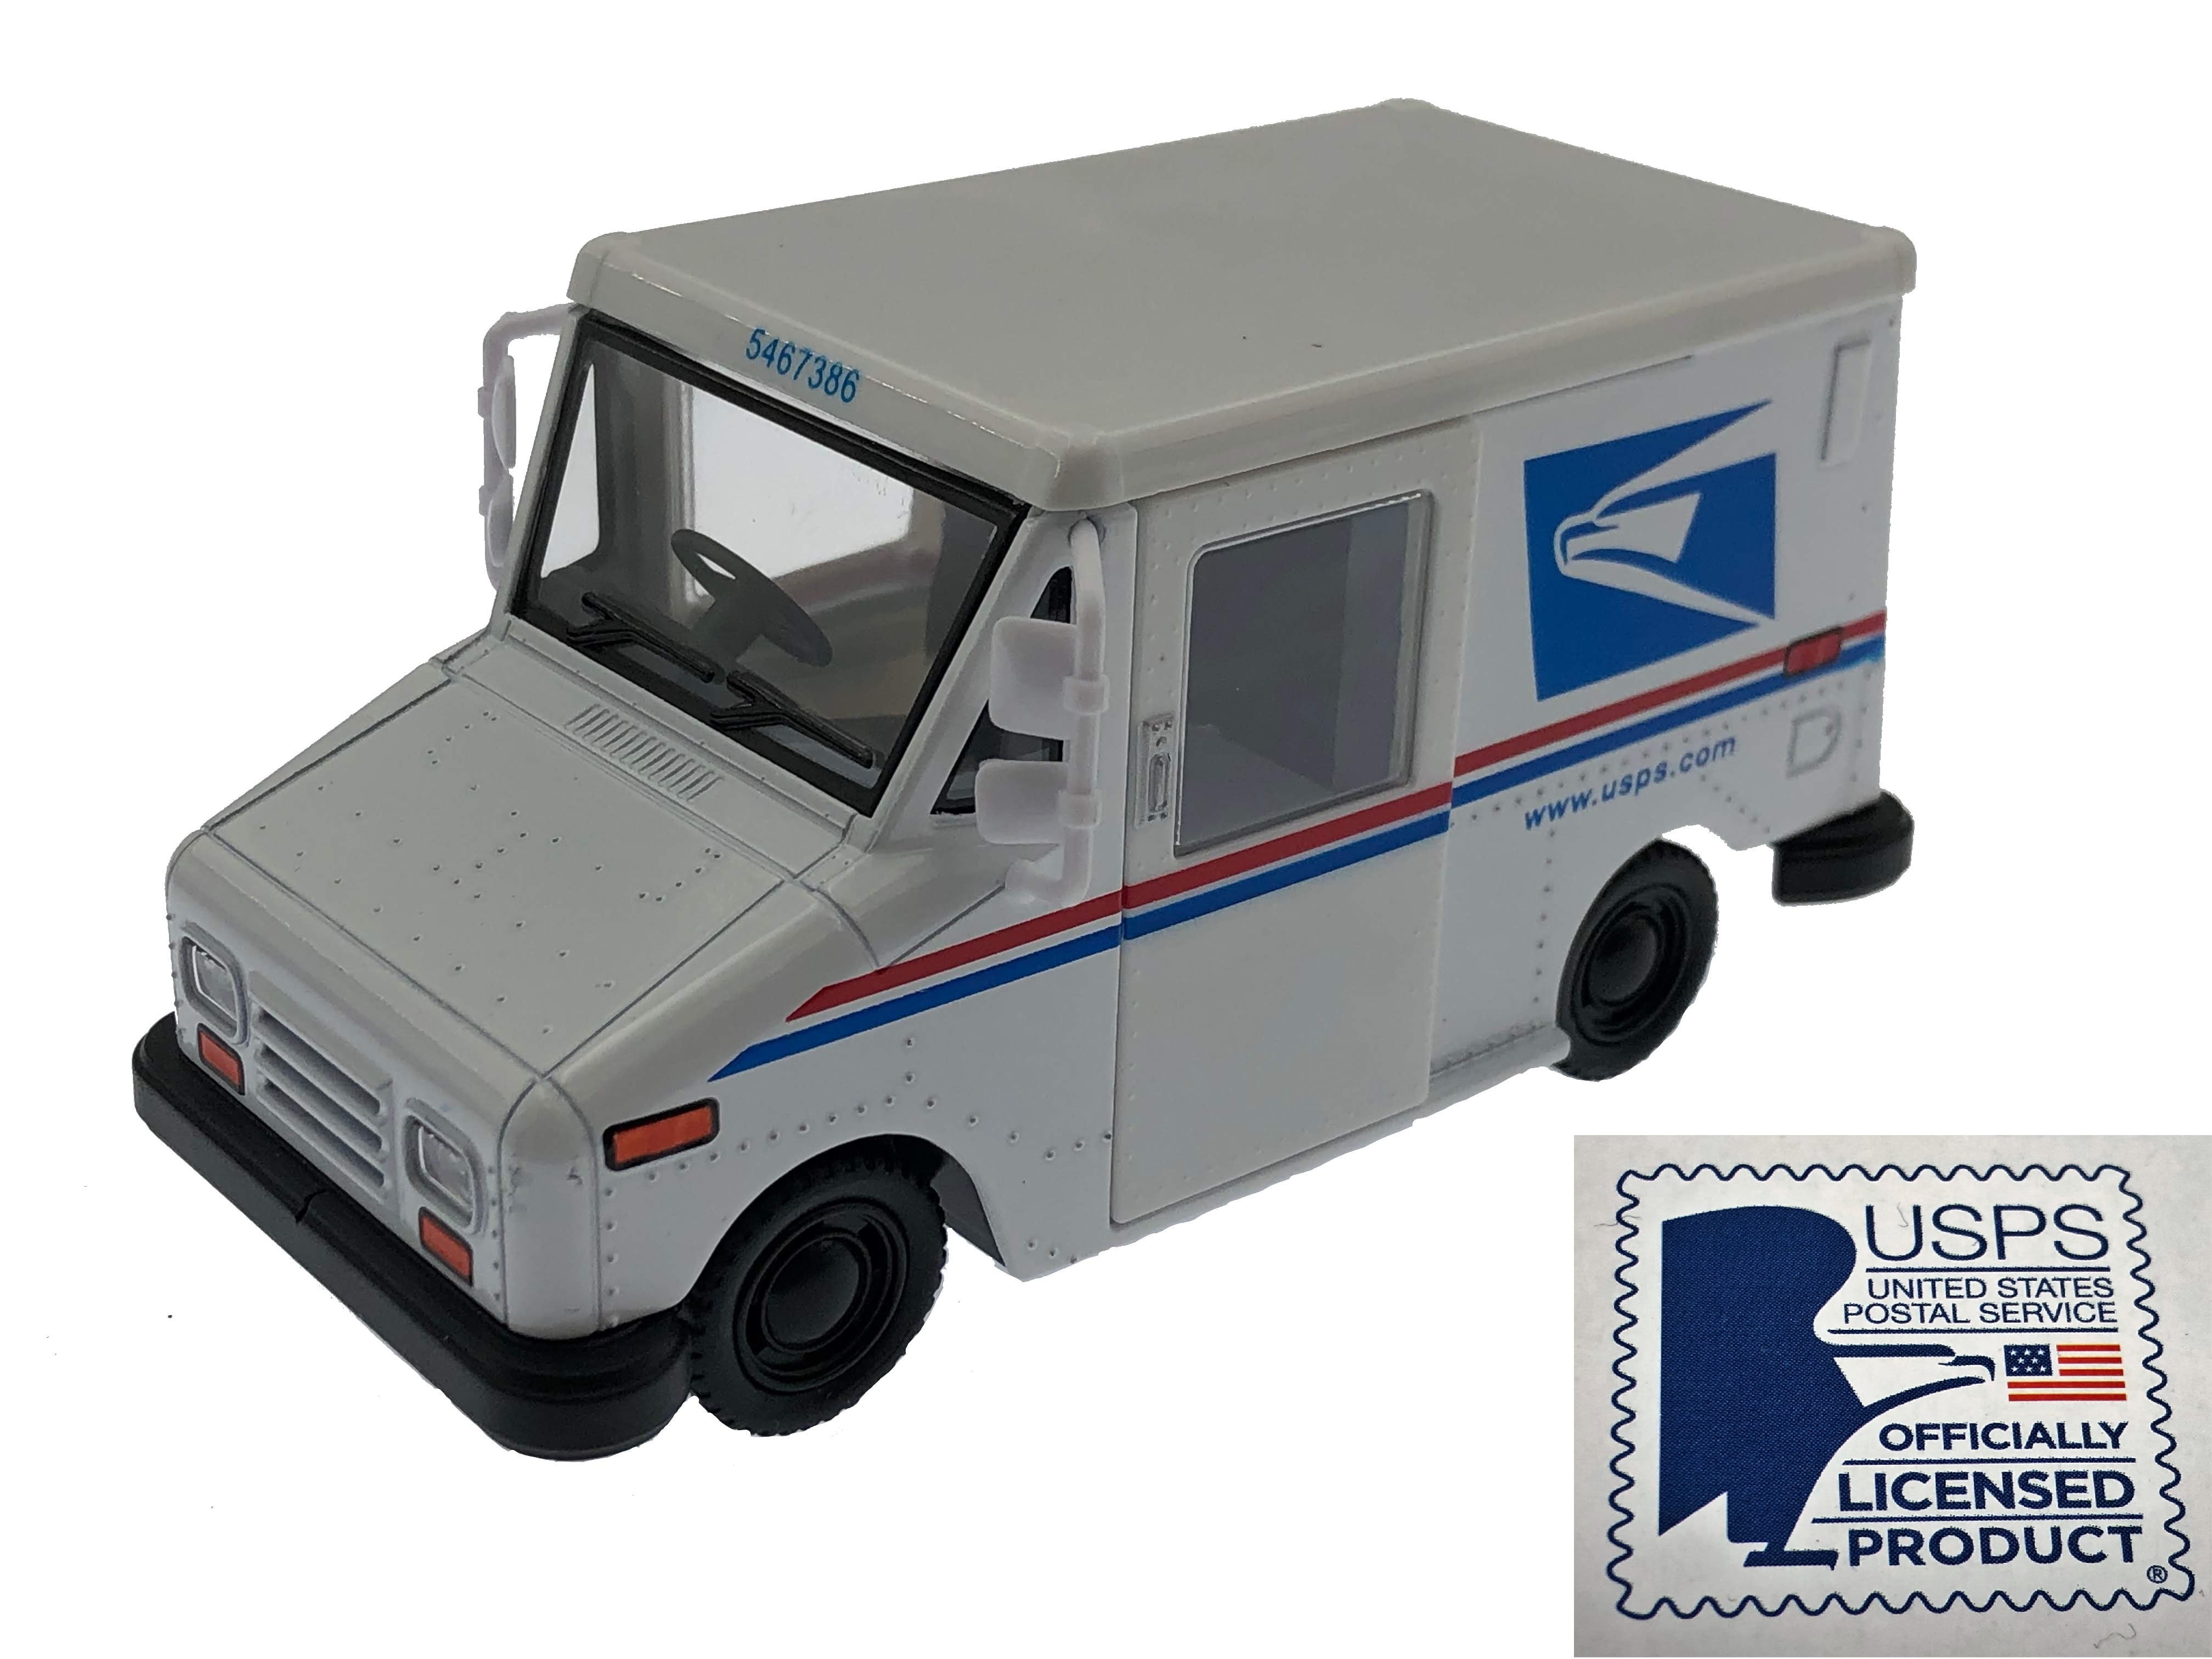 HCK Postal Service U.S Mail Delivery Truck Diecast Model Toy Car in White 